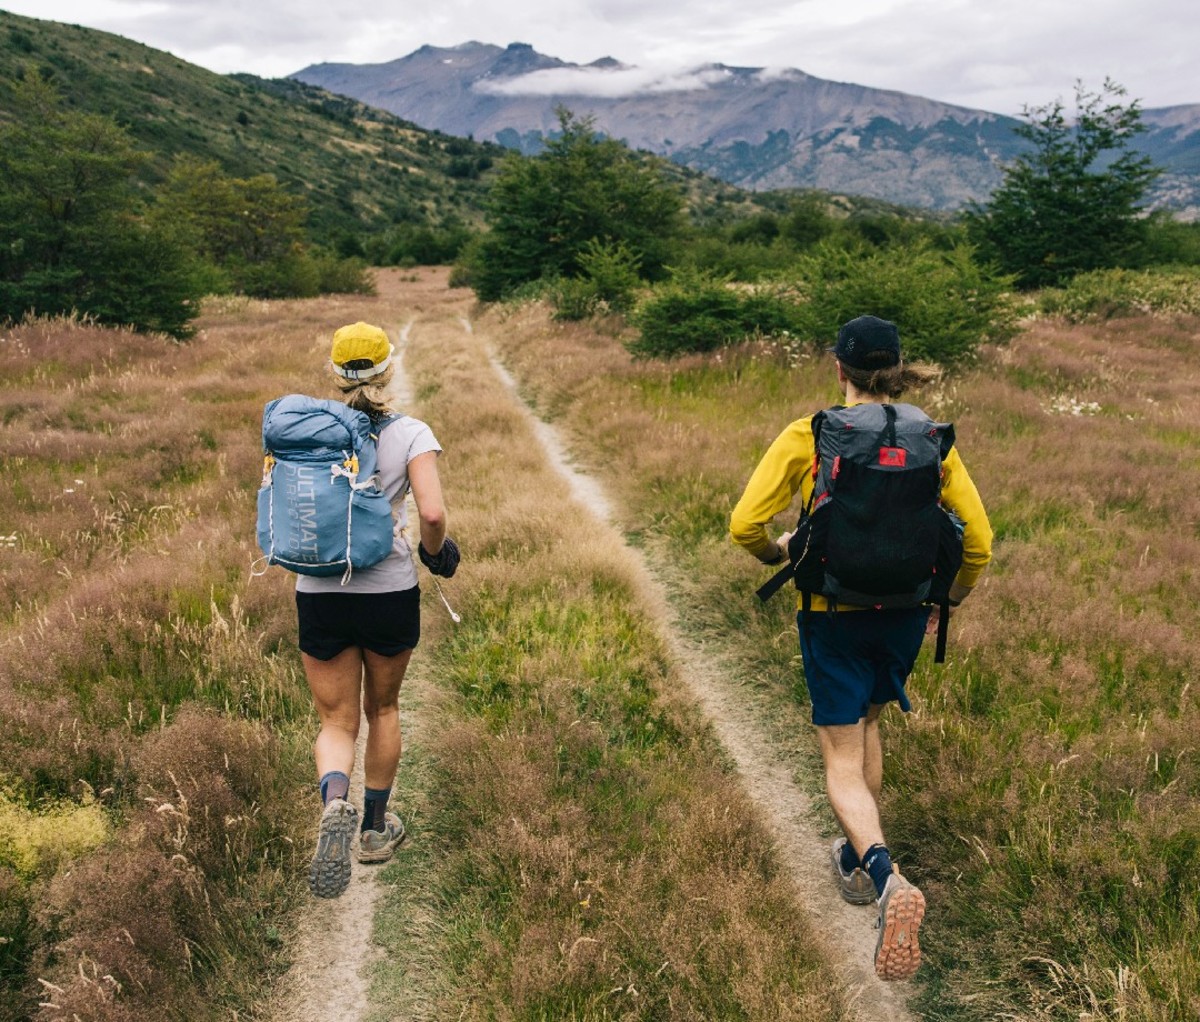 Two fastpackers trek along a grassy dirt trail in the flats of Torres del Paine National Park